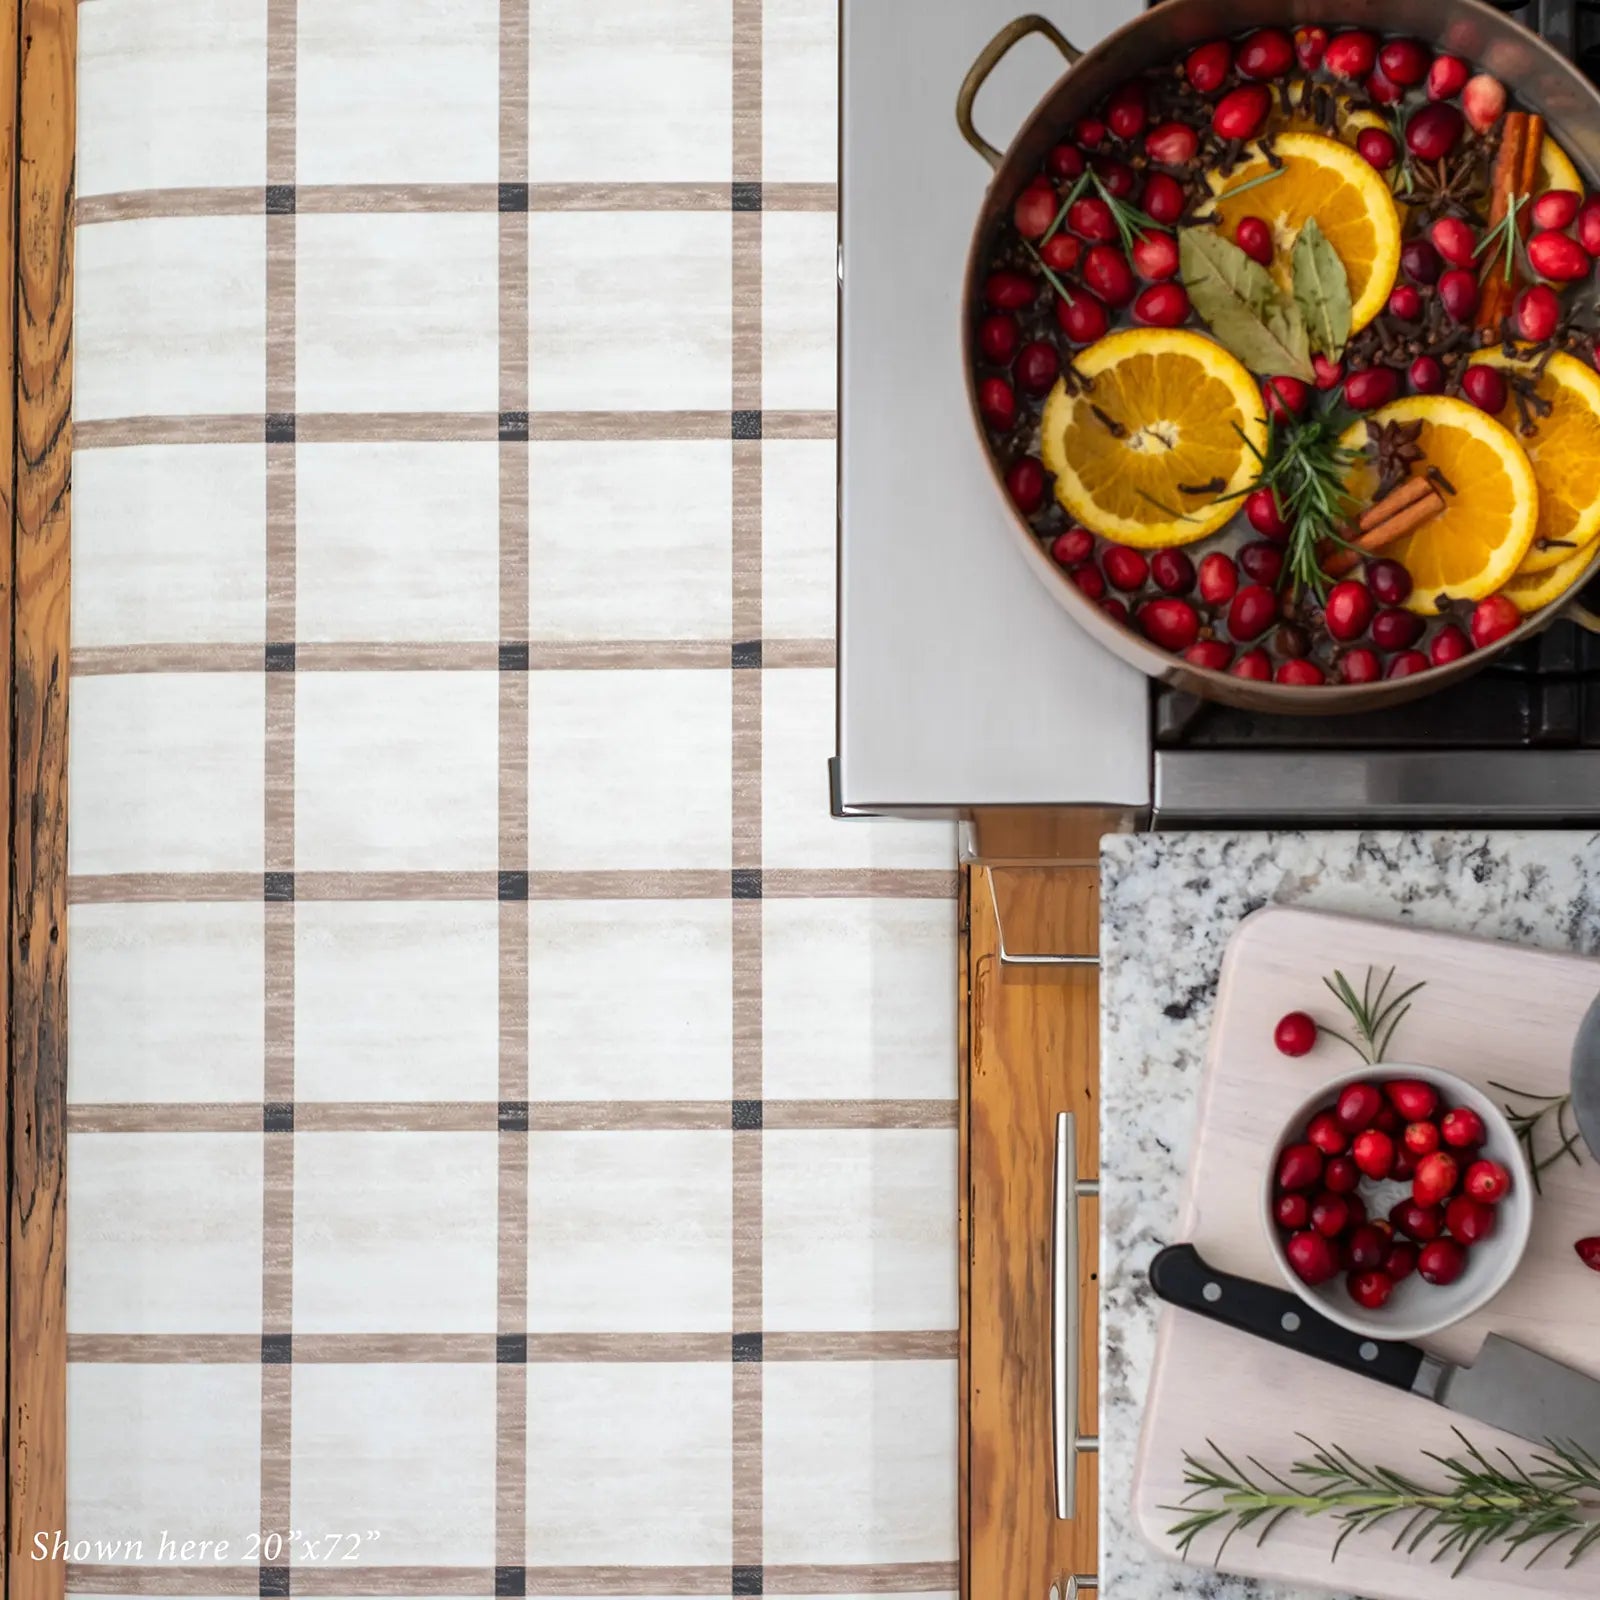 Brown and white neutral grid pattern kitchen mat shown in size 20x72 from above in front of stove with cranberry and orange stovetop potpourri 